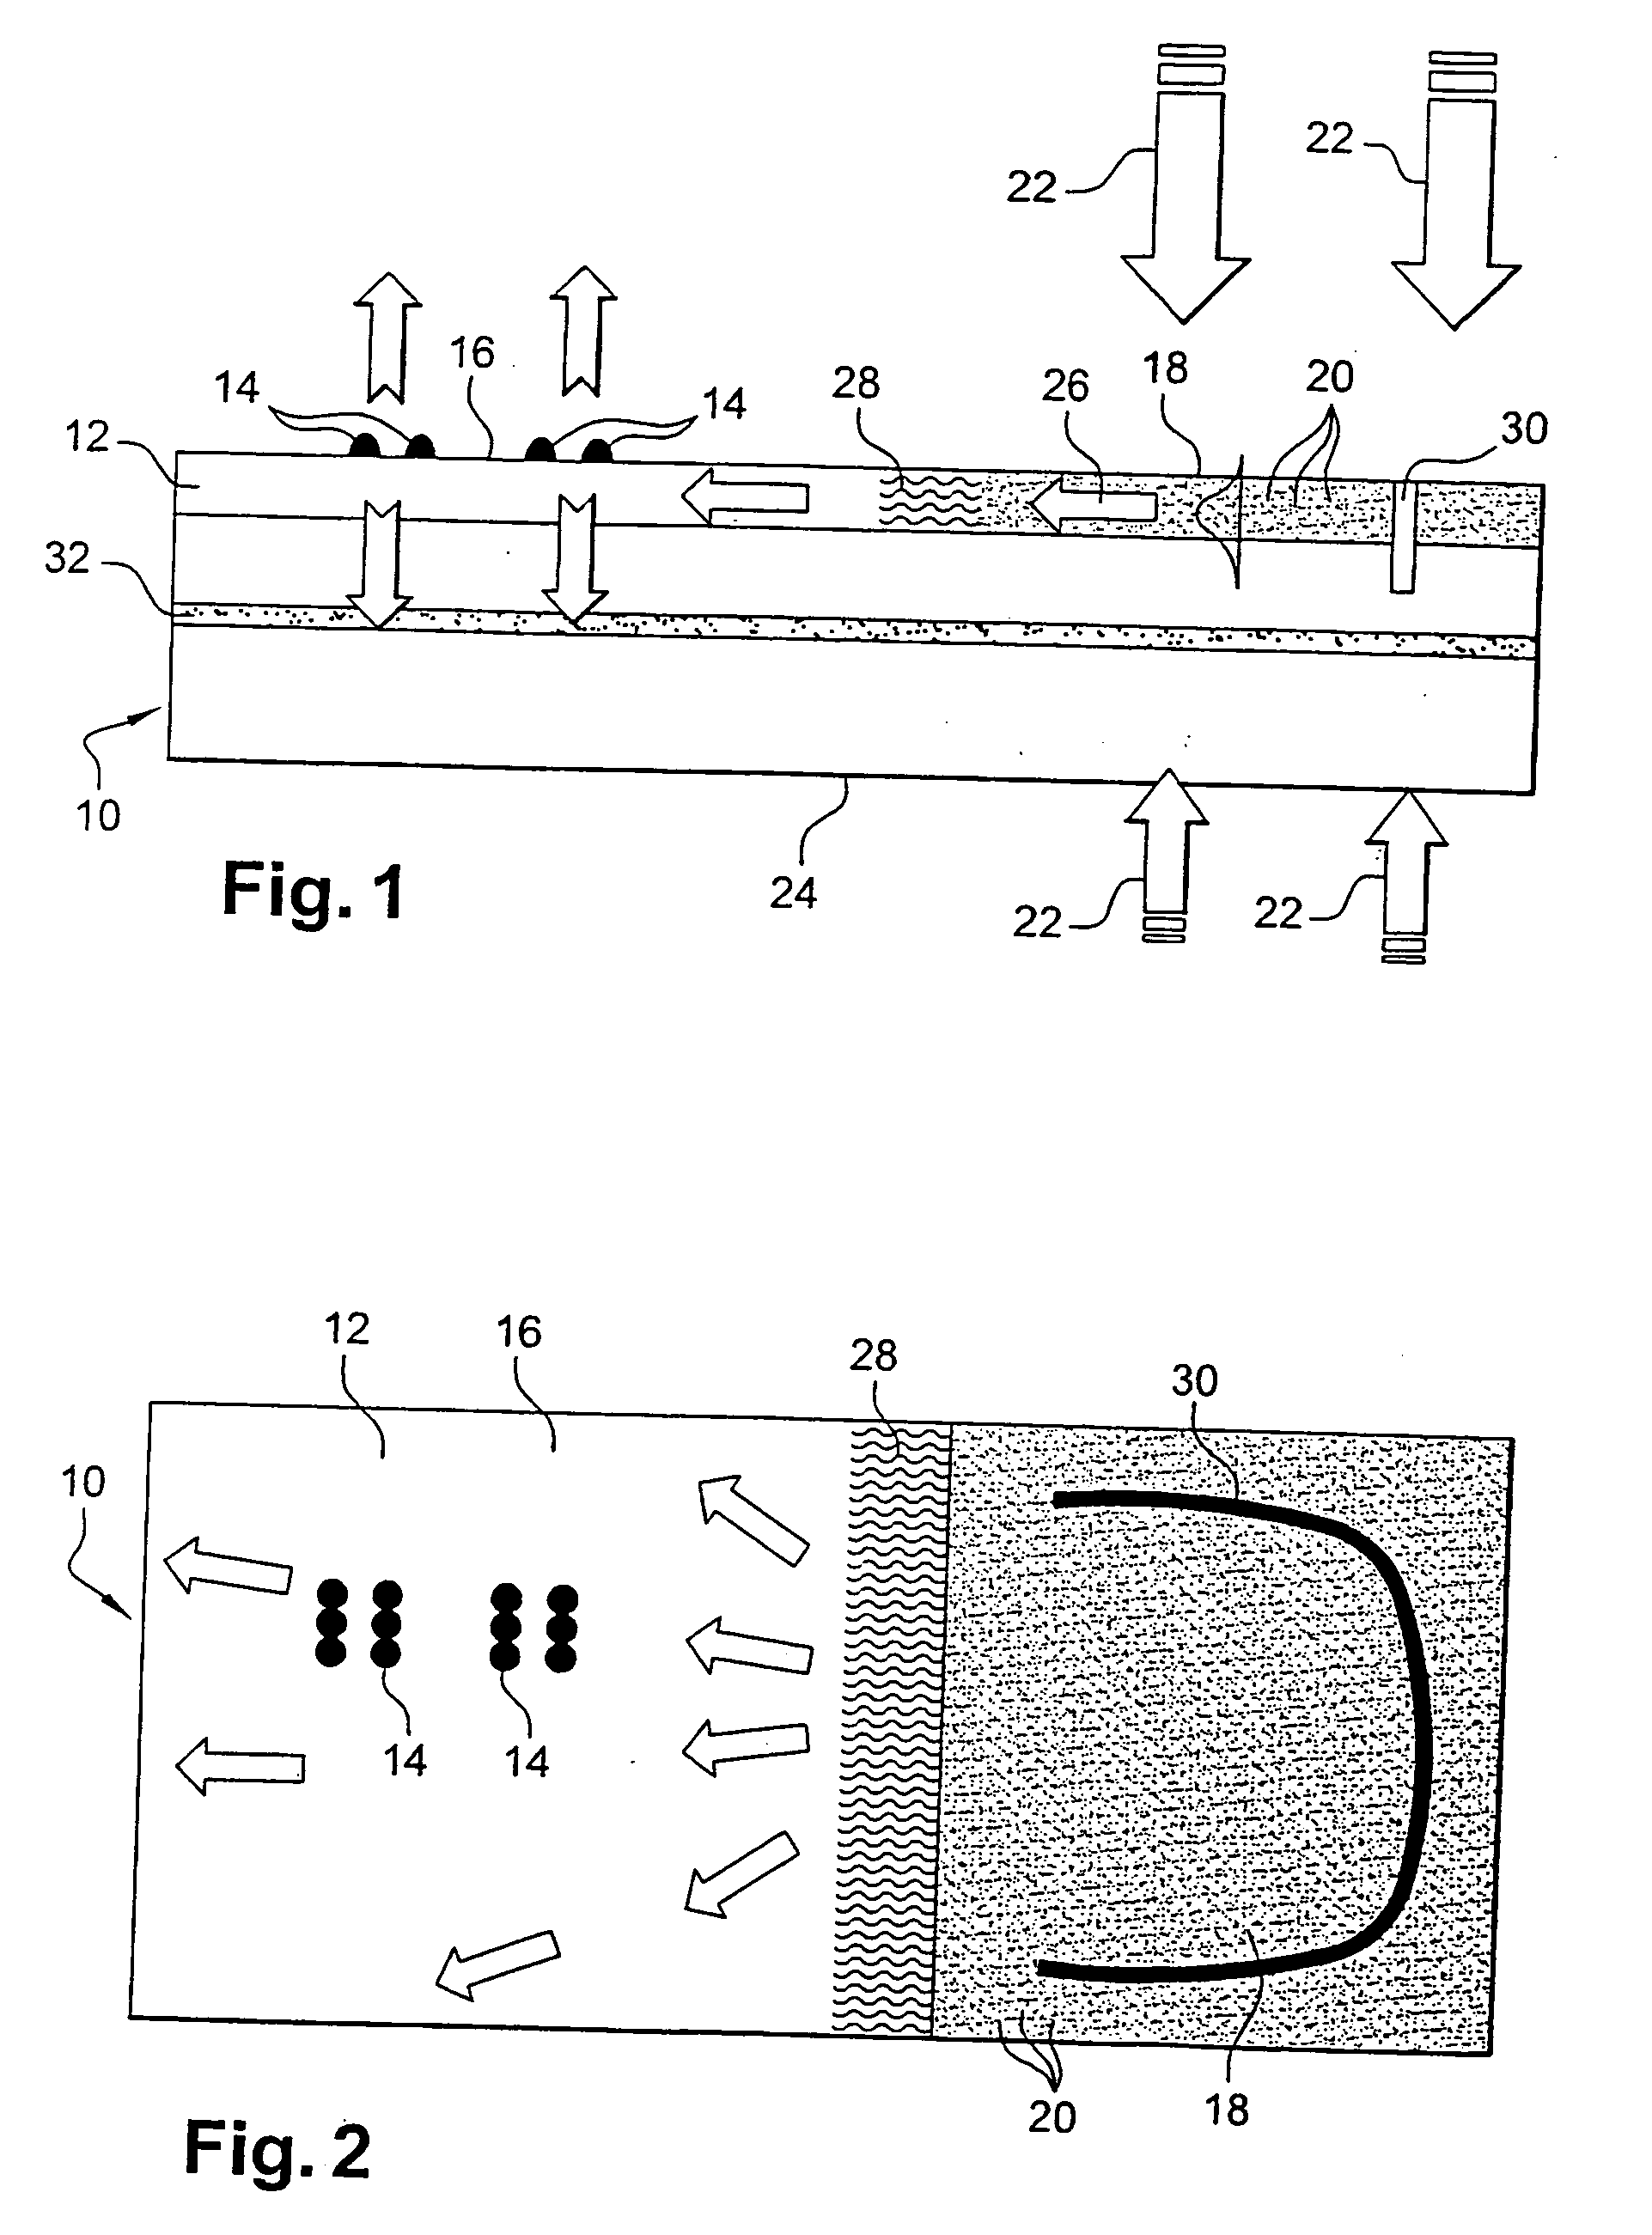 Device for supporting chromophore elements